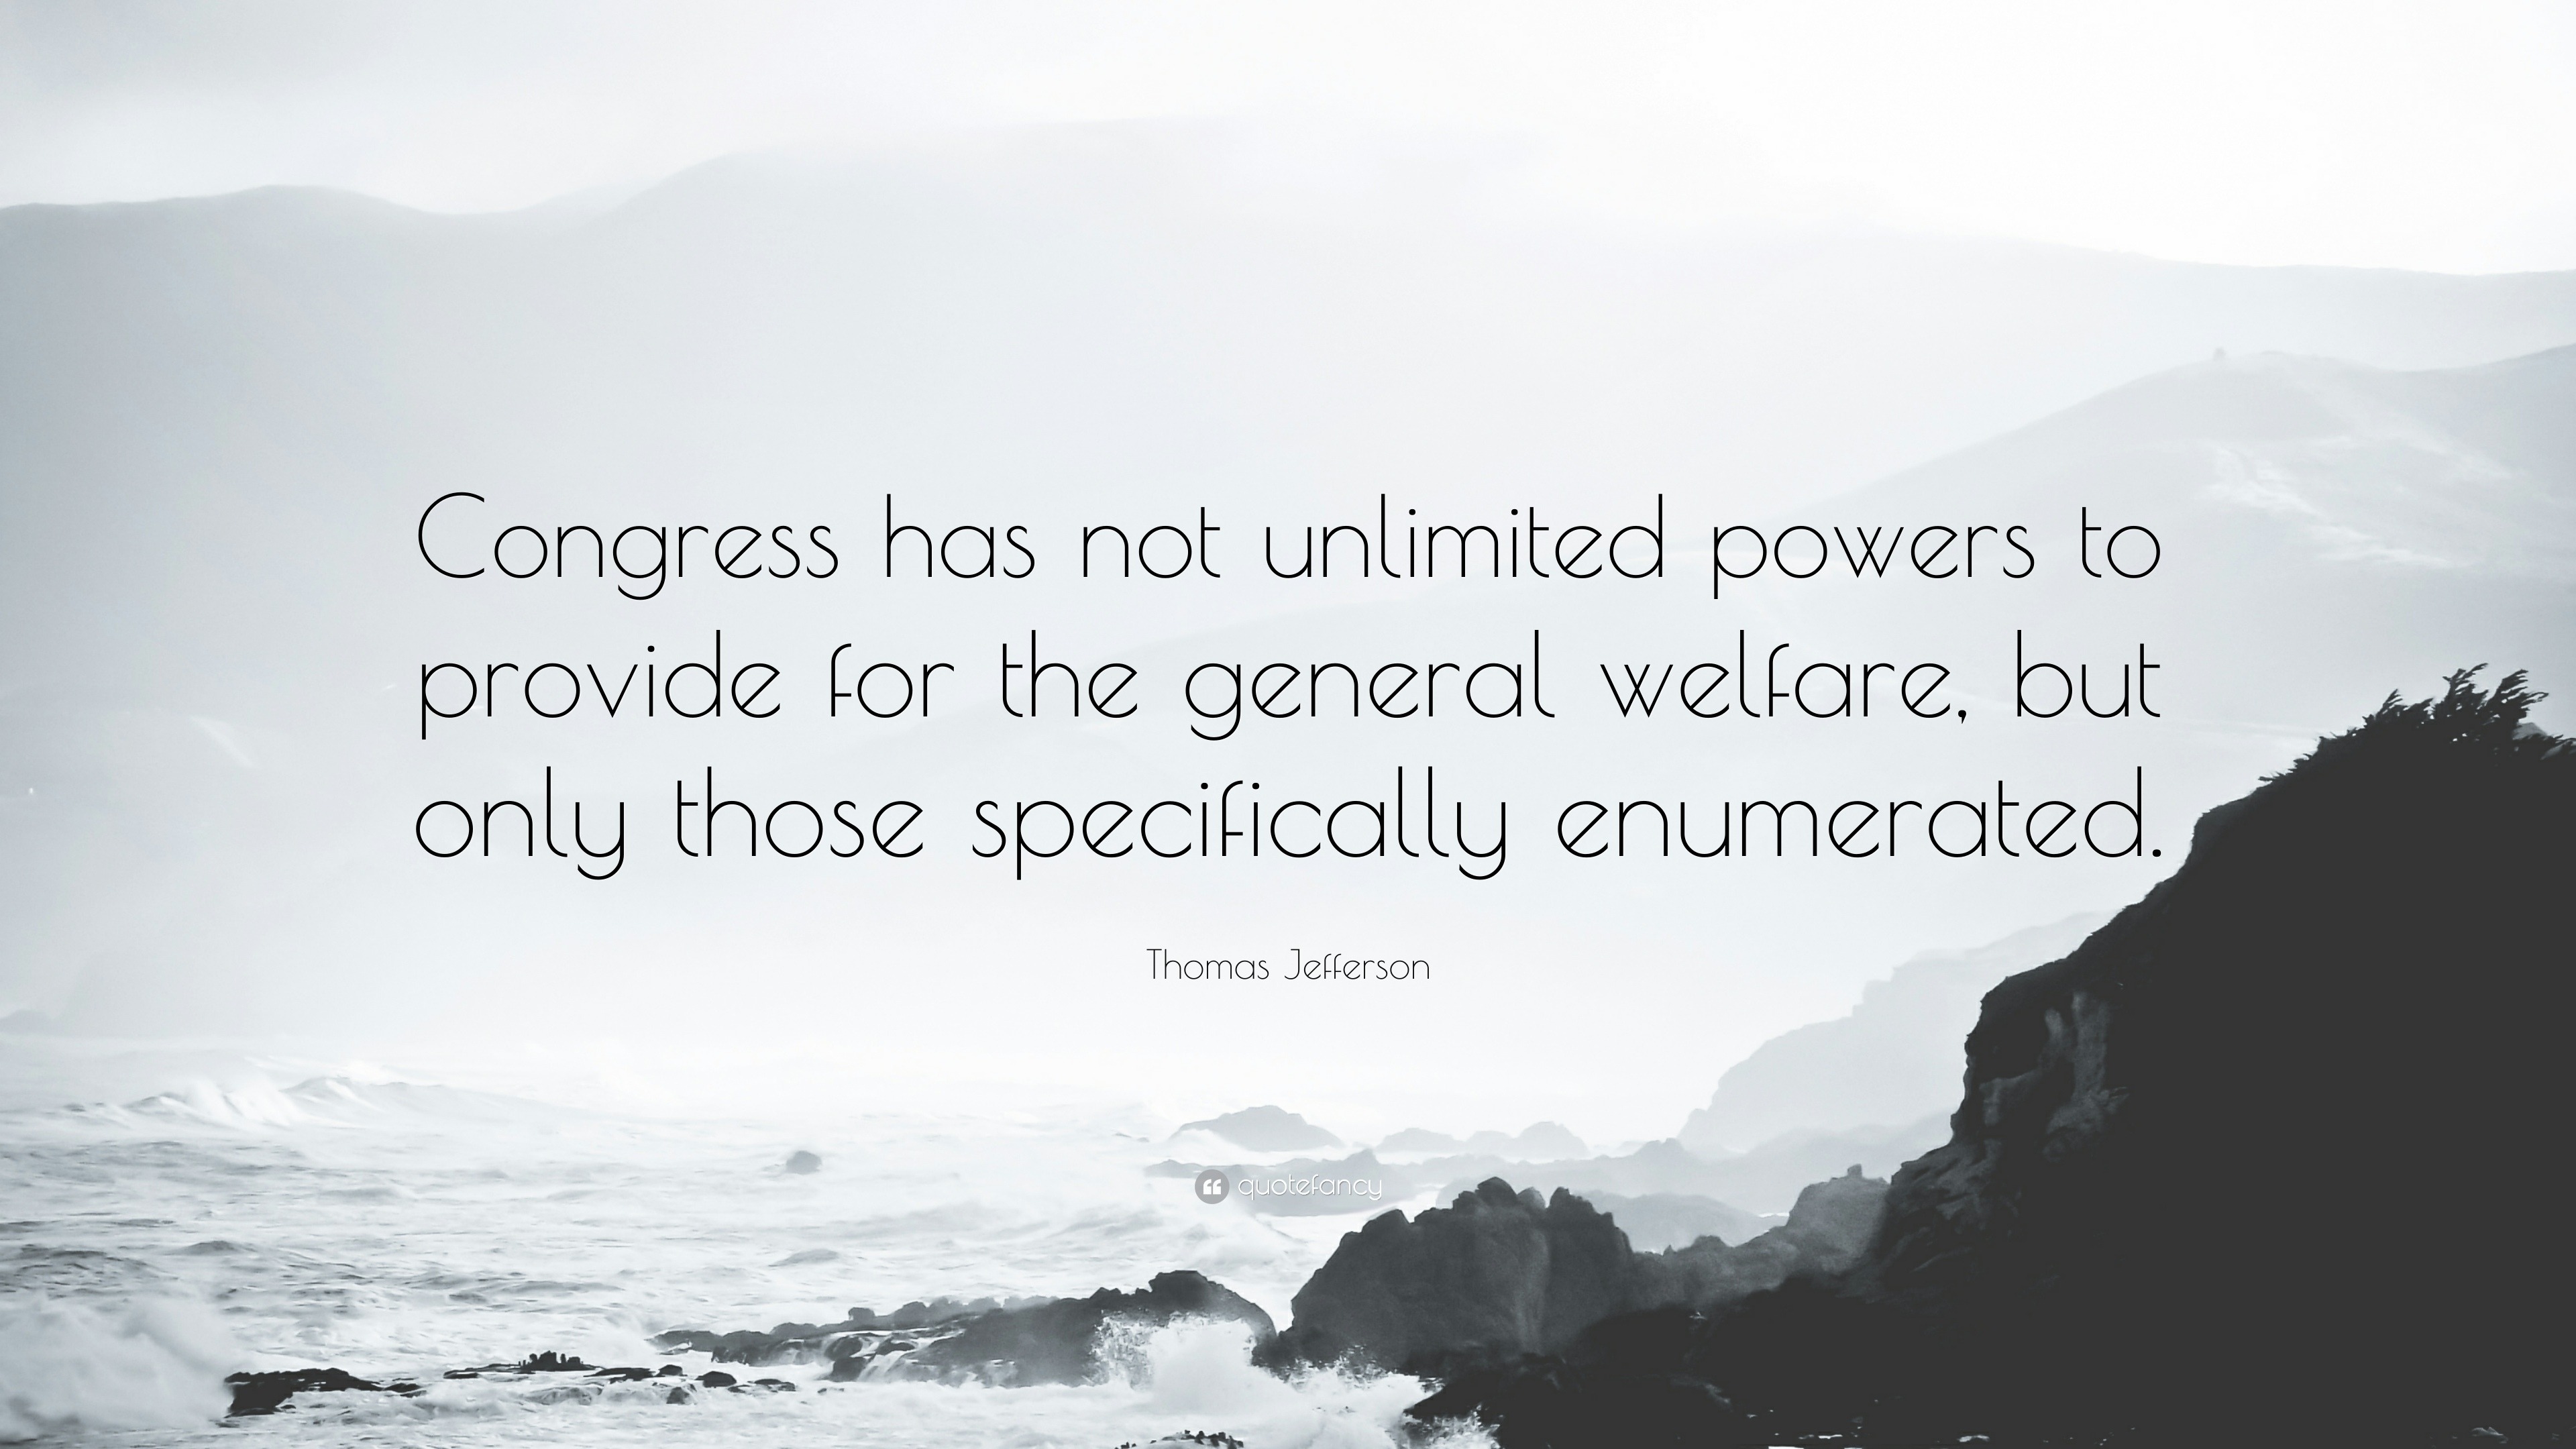 provide for the general welfare